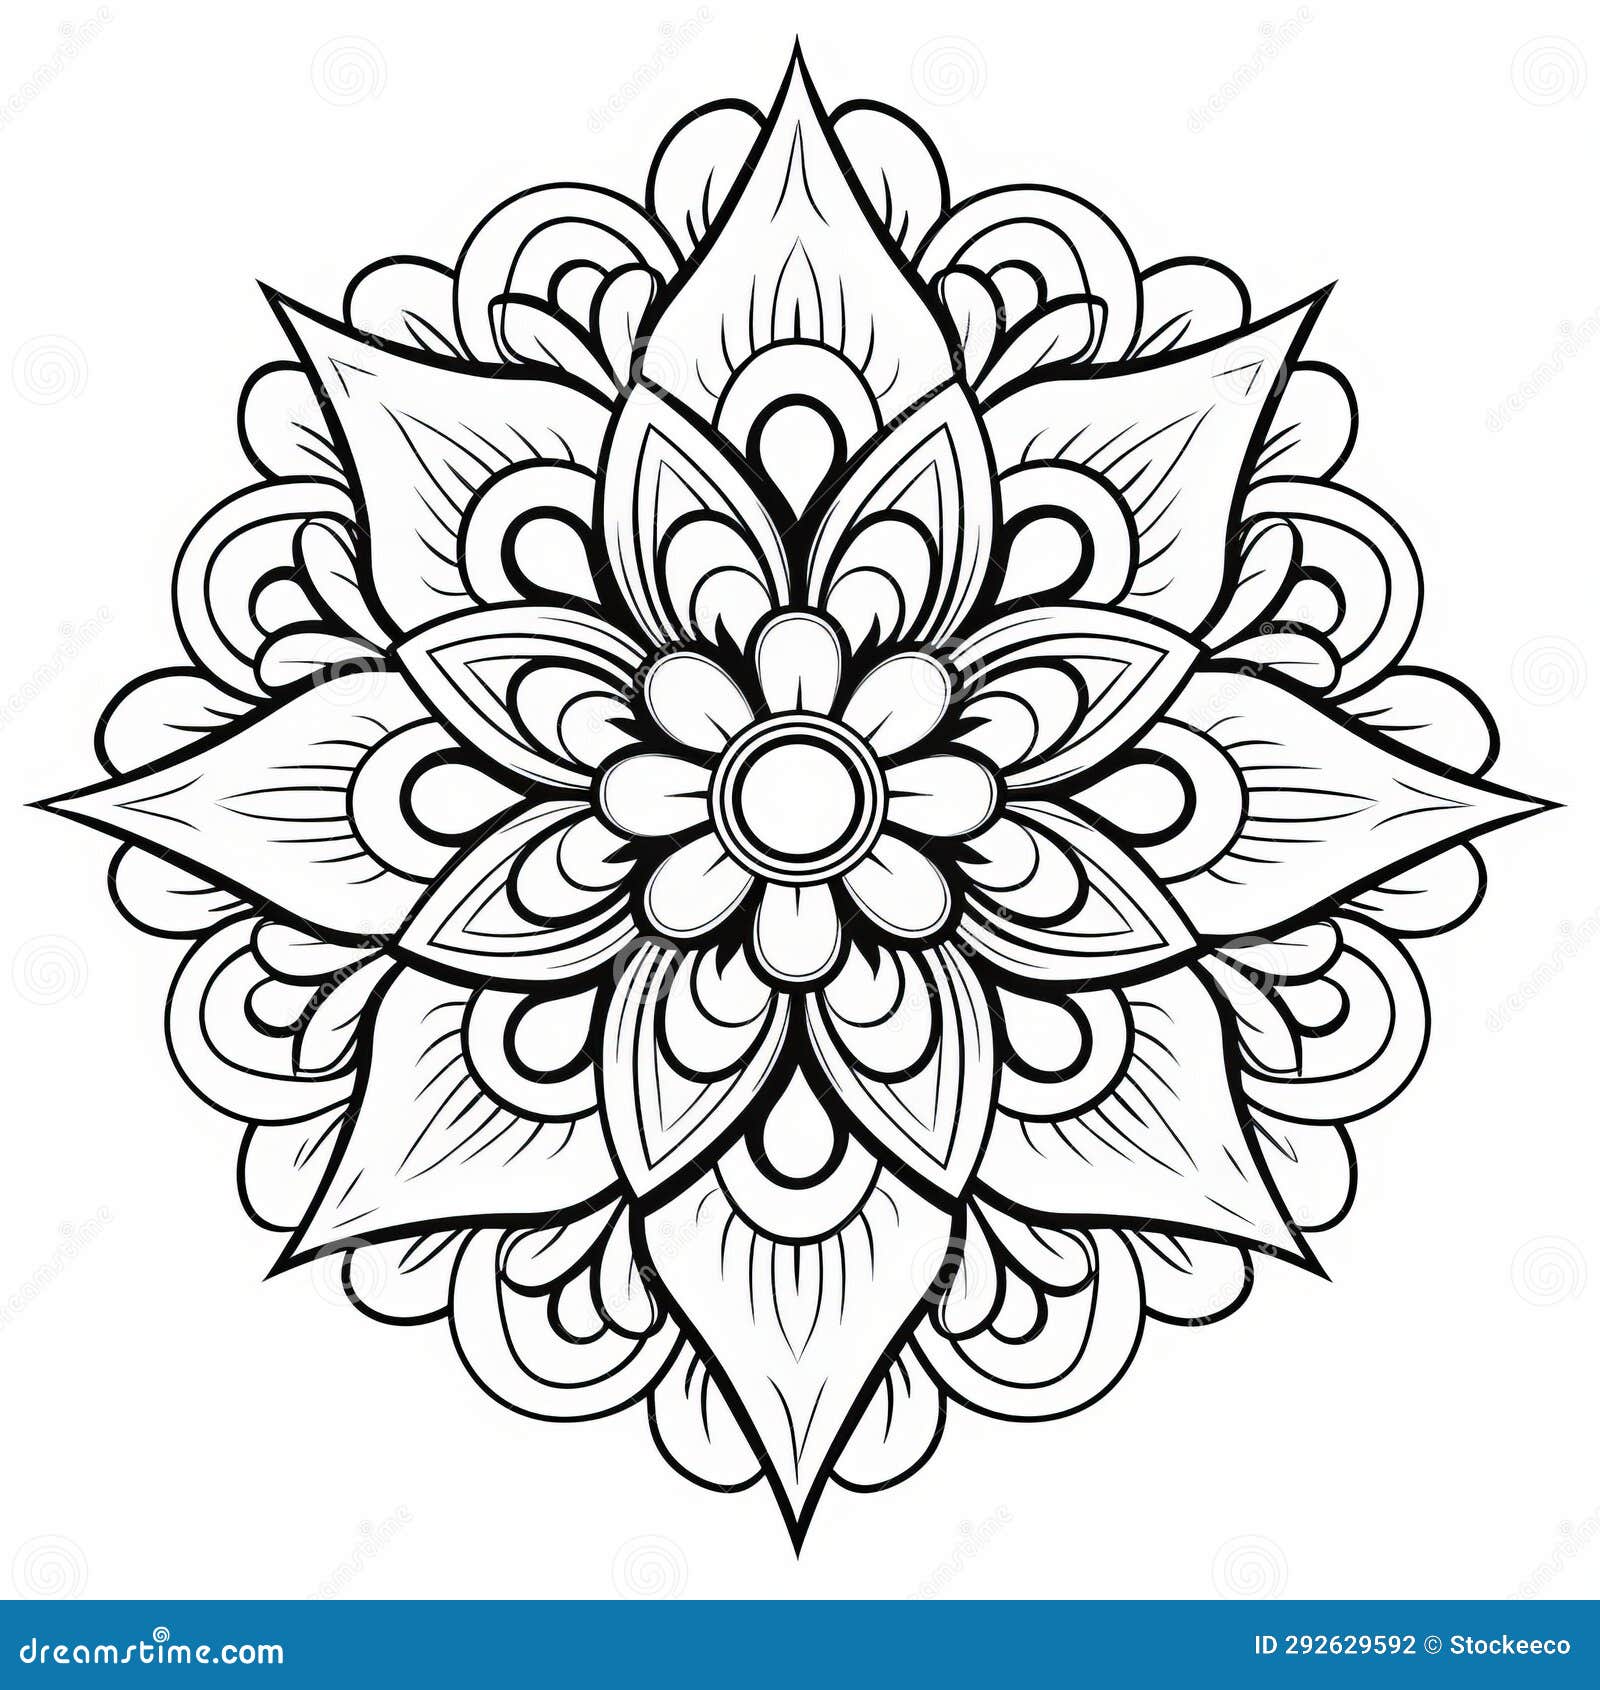 Mandalas for adults intricate coloring pages for relaxation stock illustration